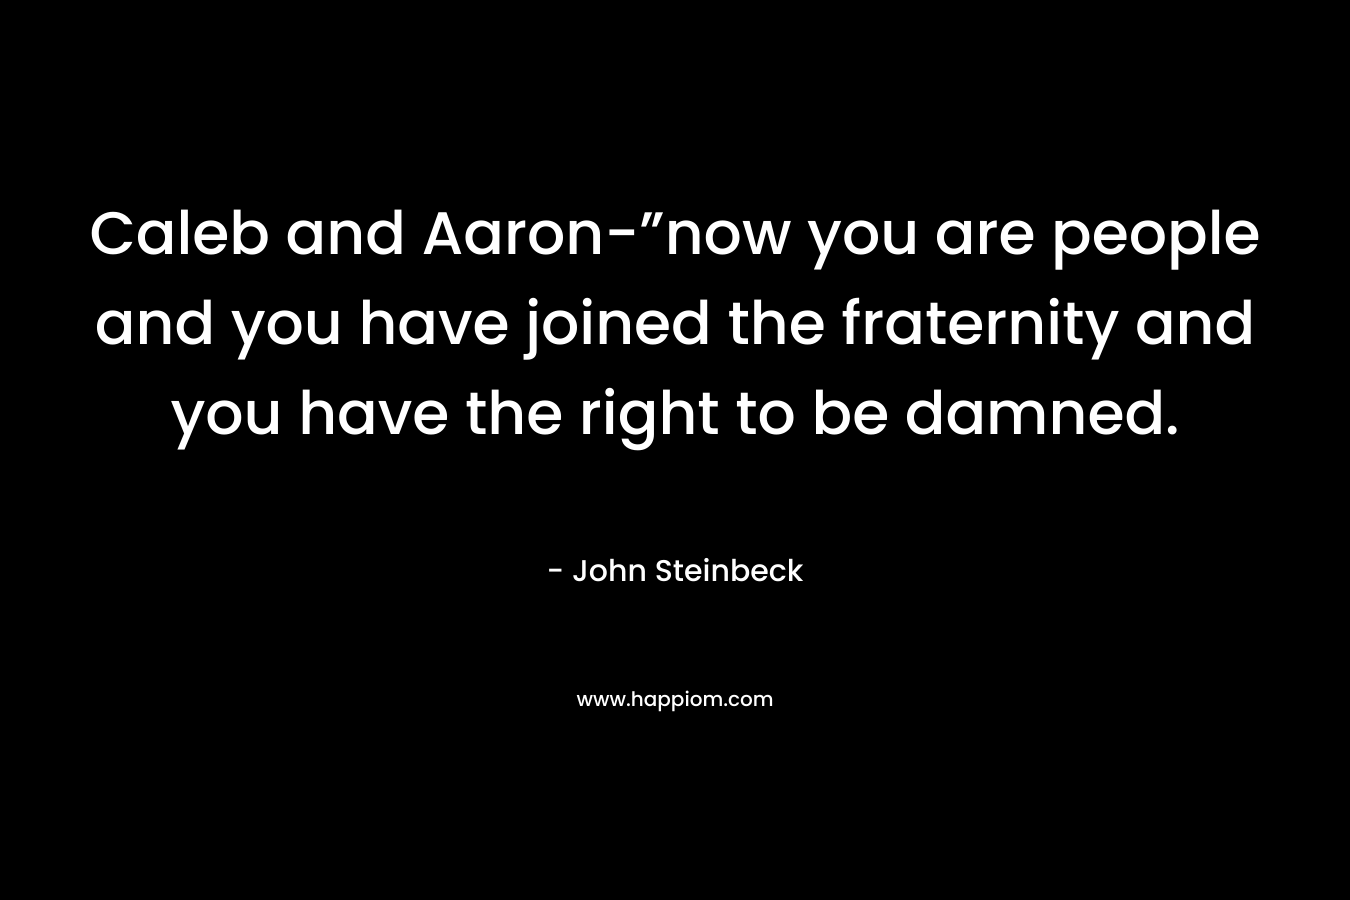 Caleb and Aaron-”now you are people and you have joined the fraternity and you have the right to be damned.